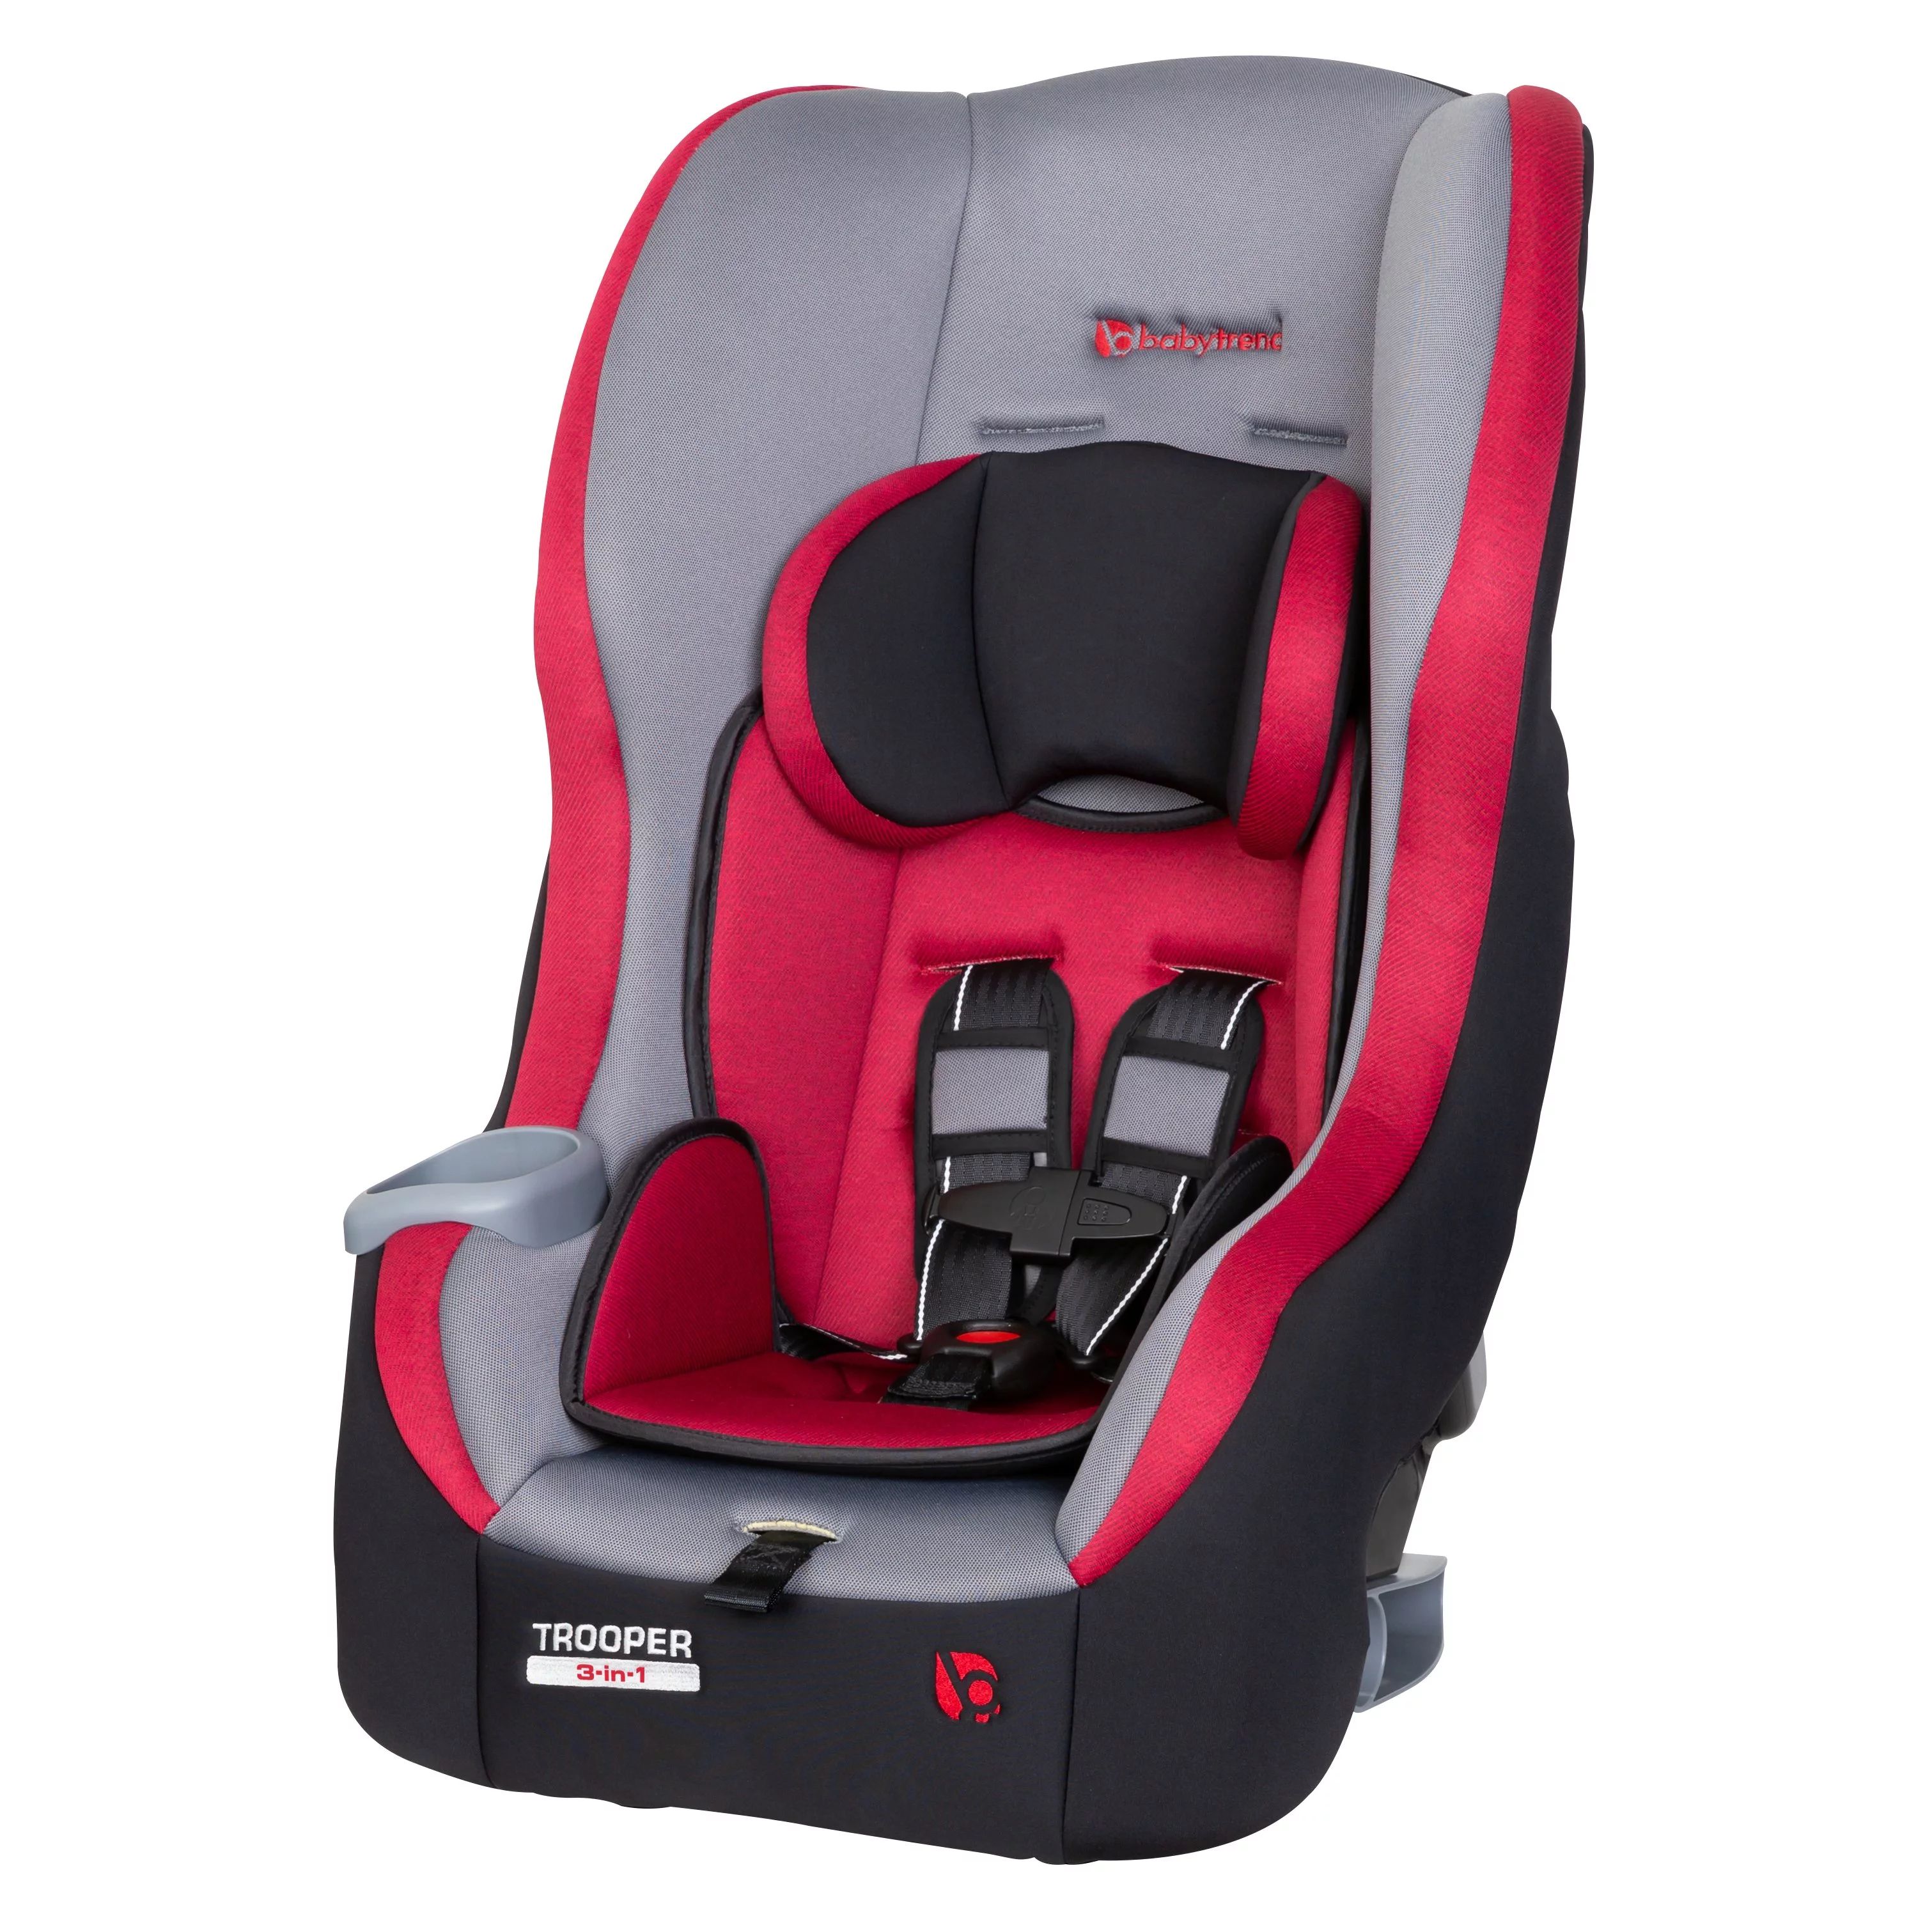 Baby Trend Trooper™ 3-in-1 Convertible Car Seat - Scooter - Red | Walmart (US)